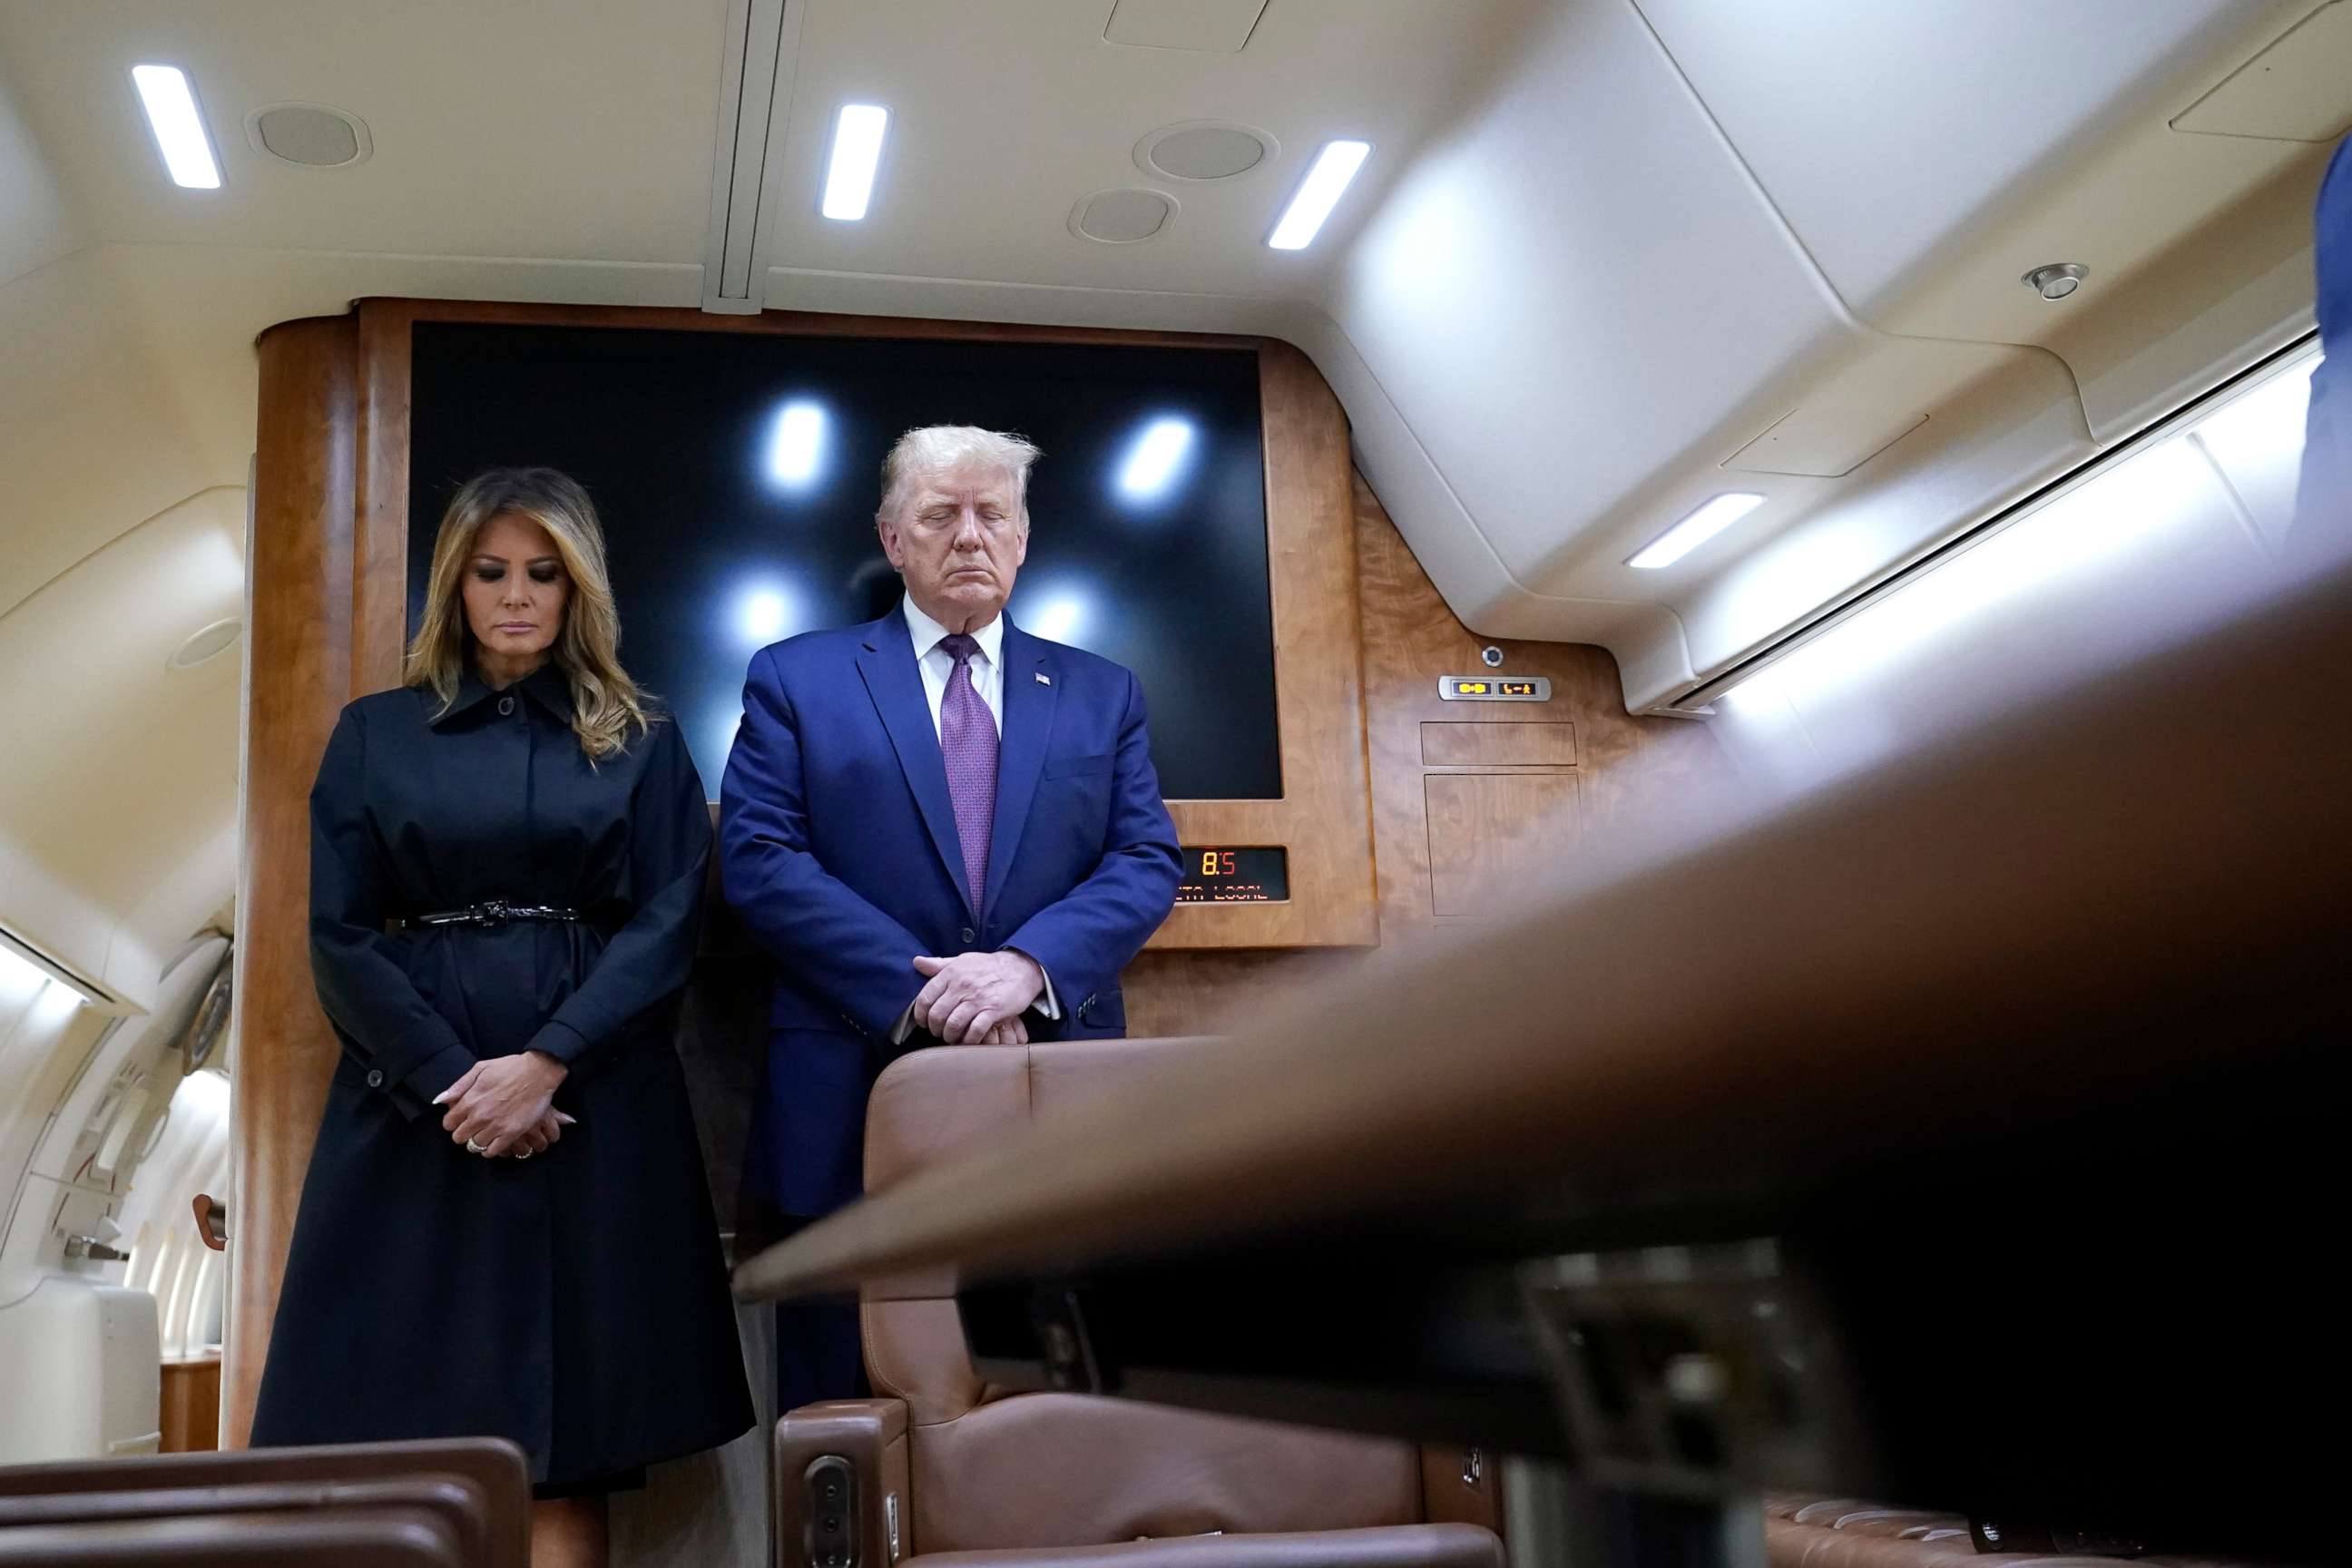 PHOTO: President Donald Trump and first lady Melania Trump pause for a moment of silence on Air Force One as he arrives at the airport in Johnstown, Pa., on his way to speak at the Flight 93 National Memorial, Sept. 11, 2020, in Shanksville, Pa.